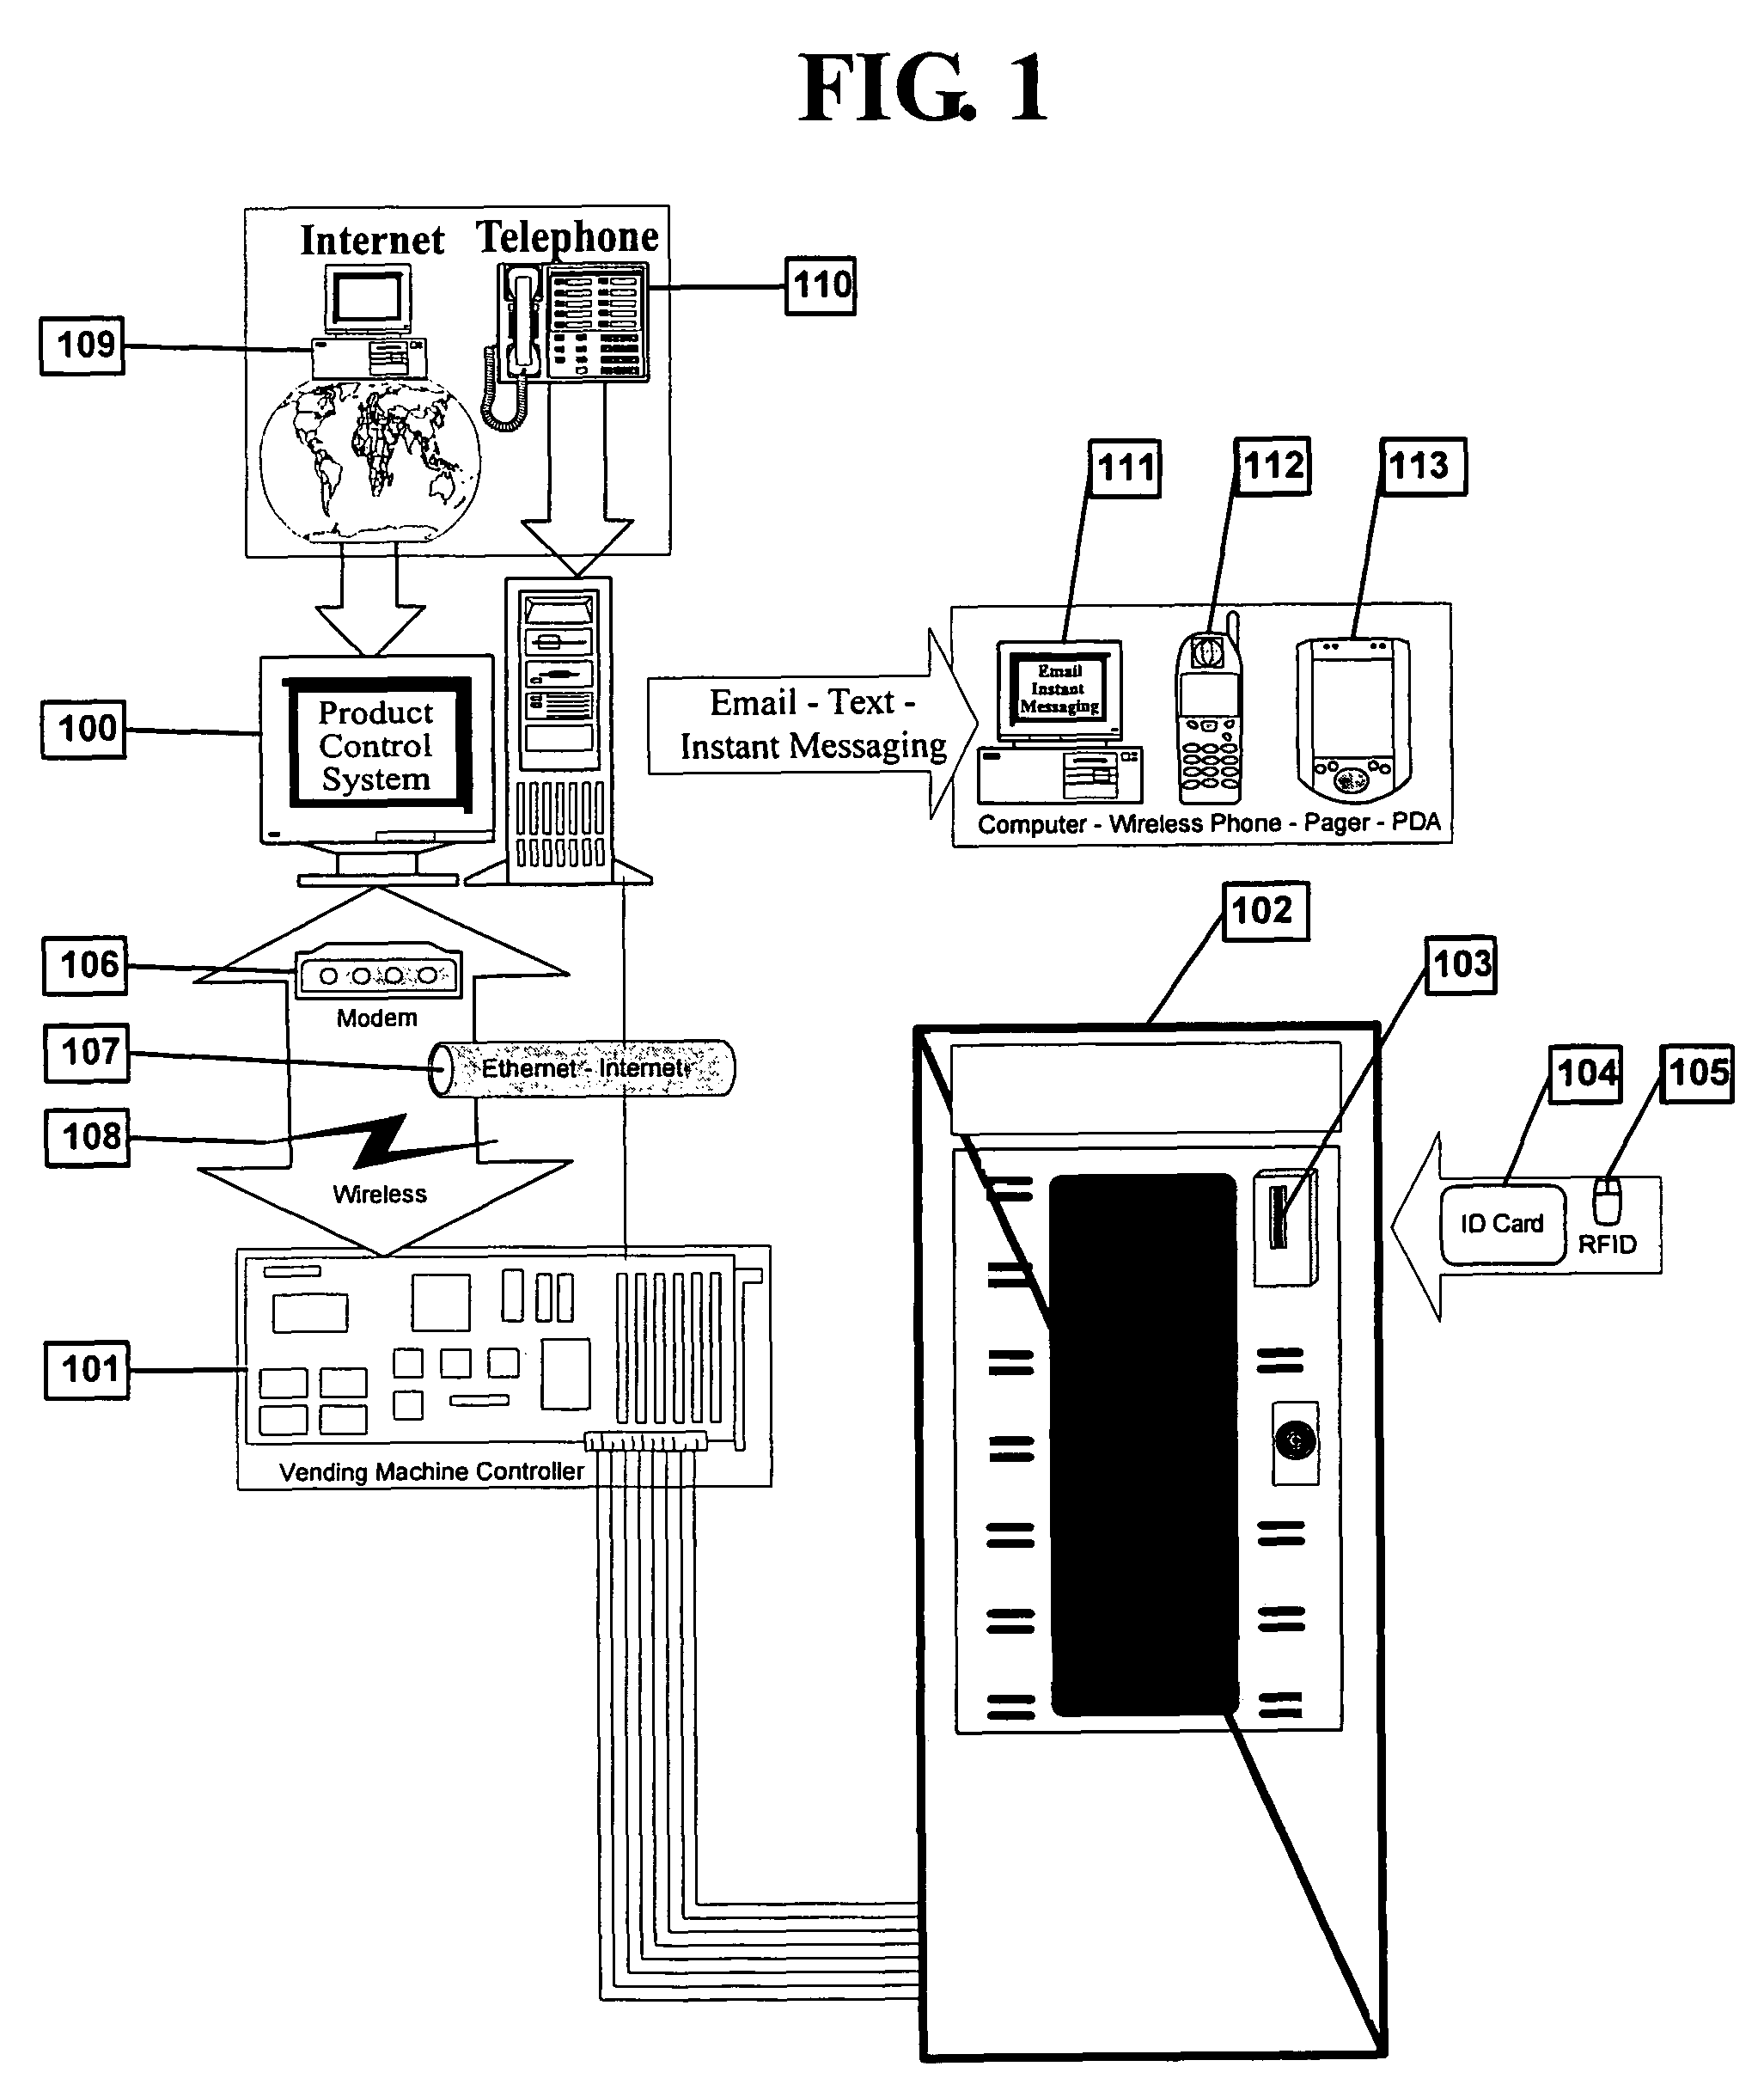 Product control system